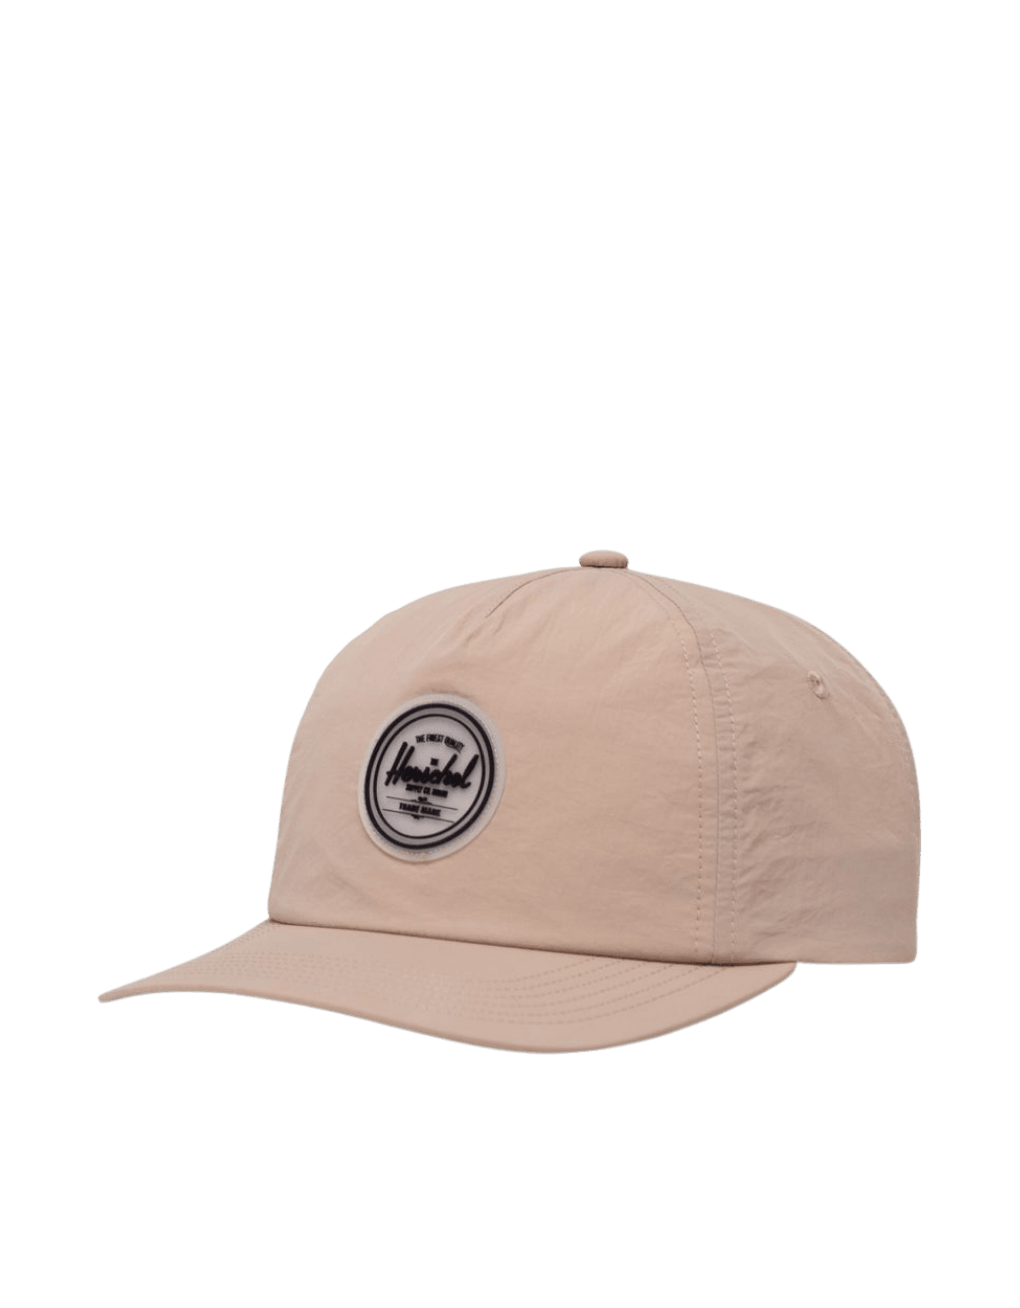 Gorra Scout Rubber Patch Light Taupe Wrinkled Nylon - ECRU